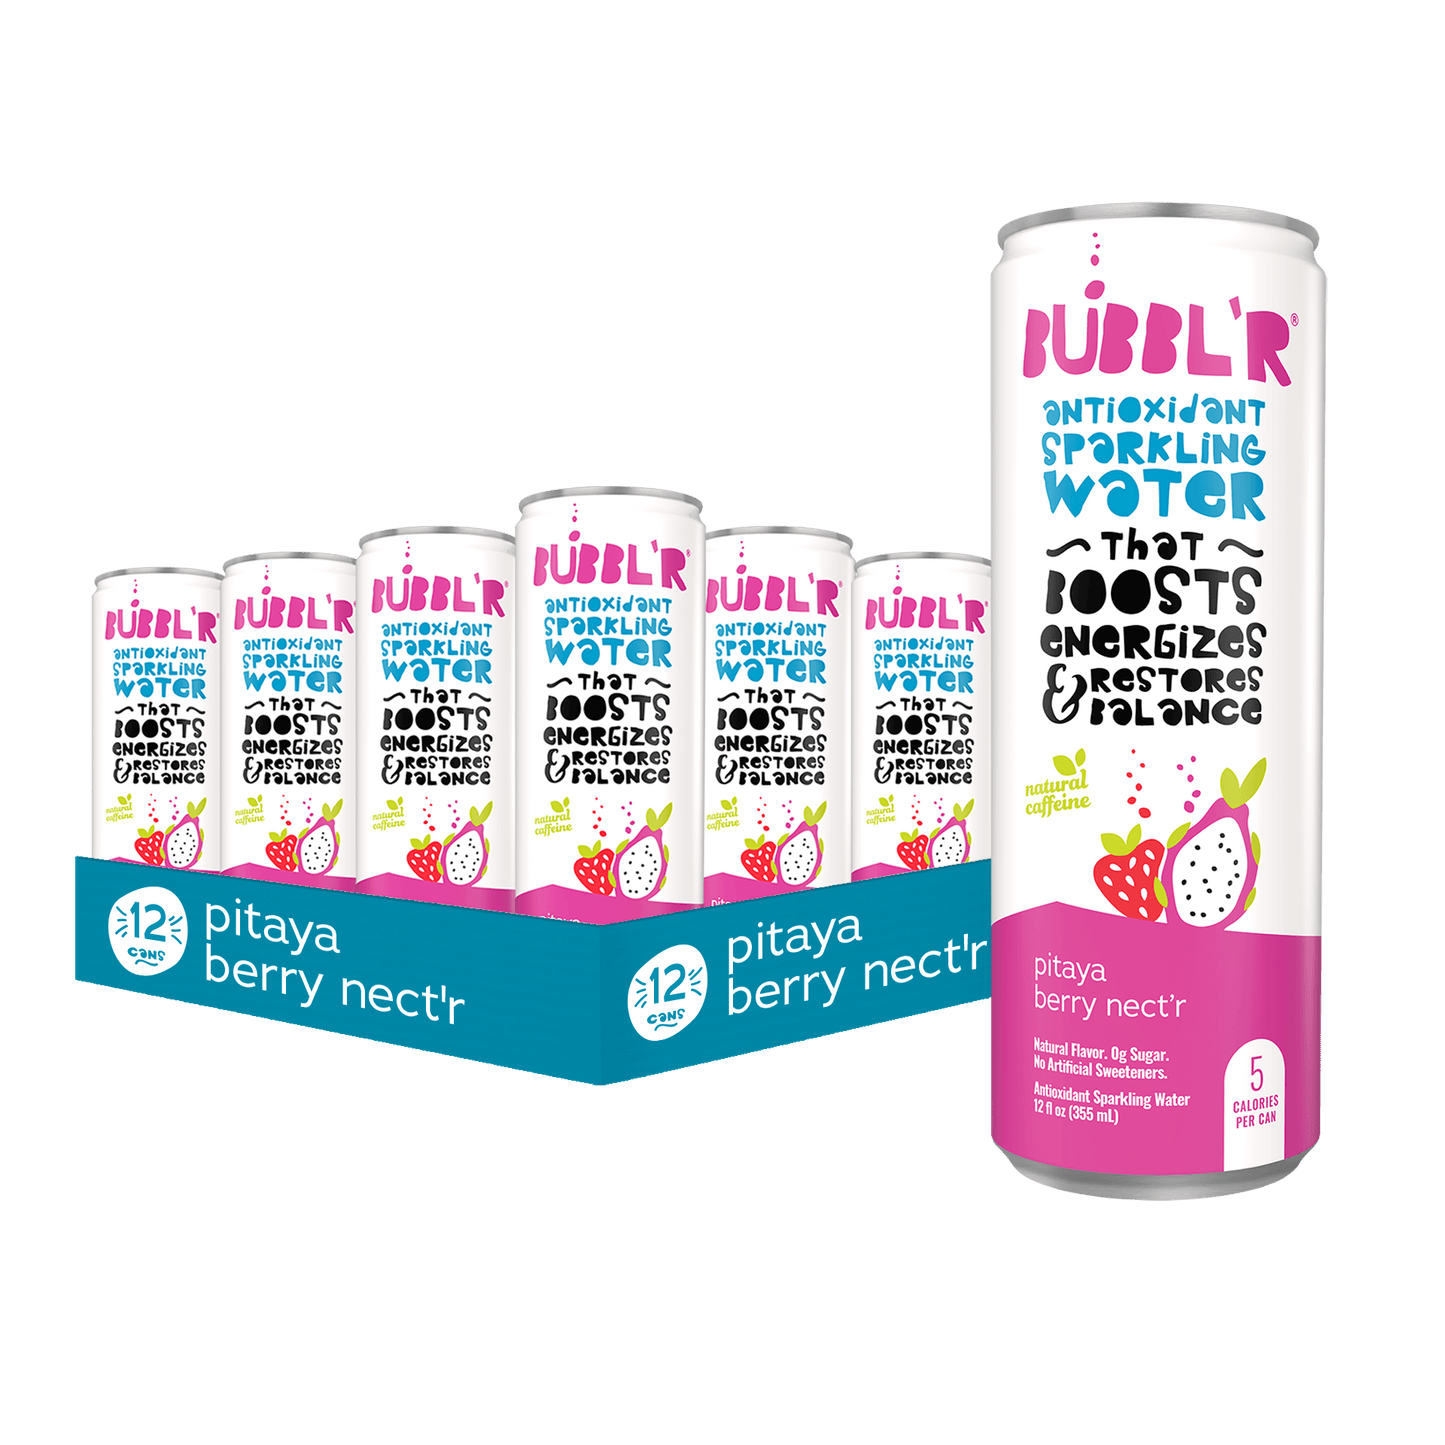 pitaya berry necter flavor 12 pack of bubbl'r cans